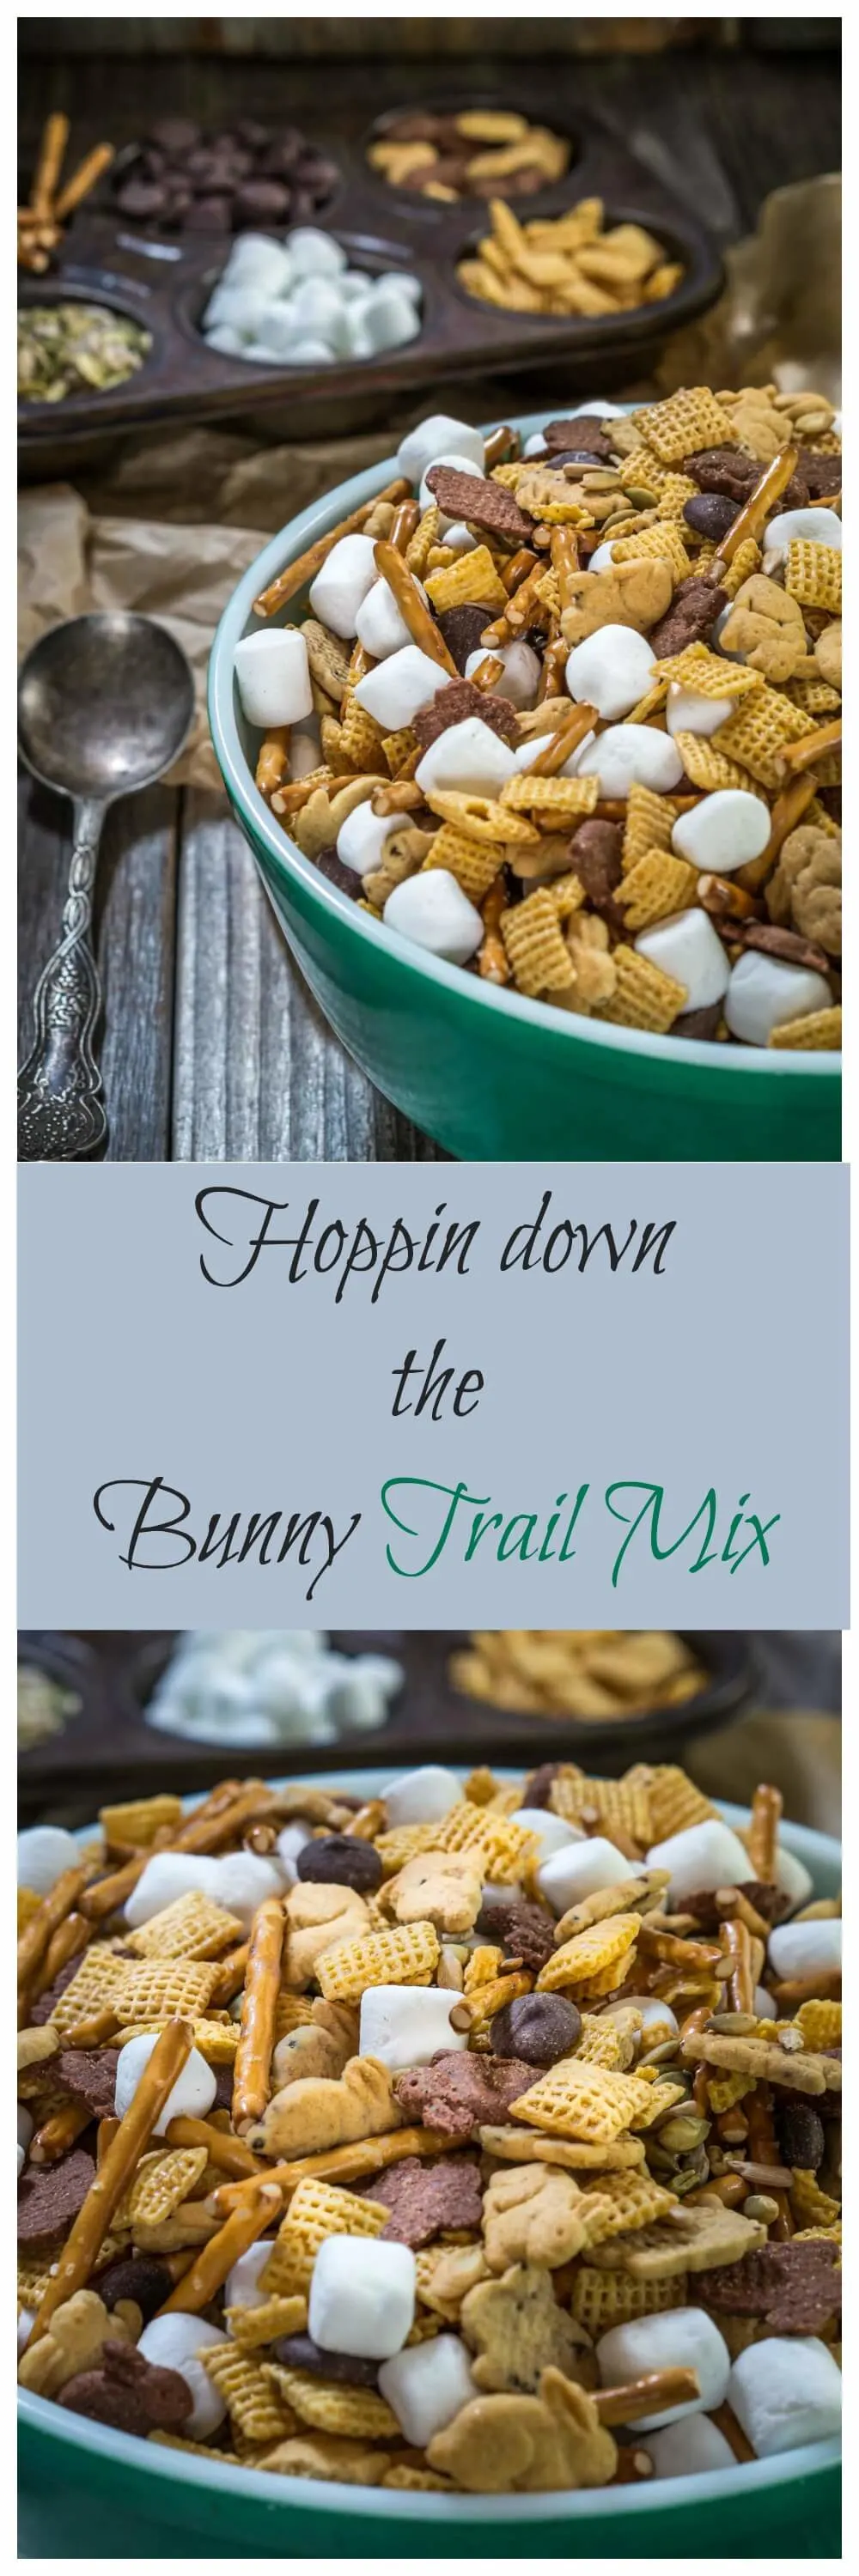 Two photo collage of a green bowl filled with snack mix containing graham crackers shaped like bunnies, cereal squares, marshmallows, pretzel sticks, and chocolate chips. A muffin tin is in the back with the ingredients filling the muffin cavities. The banner runs through the center with the title \"Hoppin down the Bunny Trail Mix.